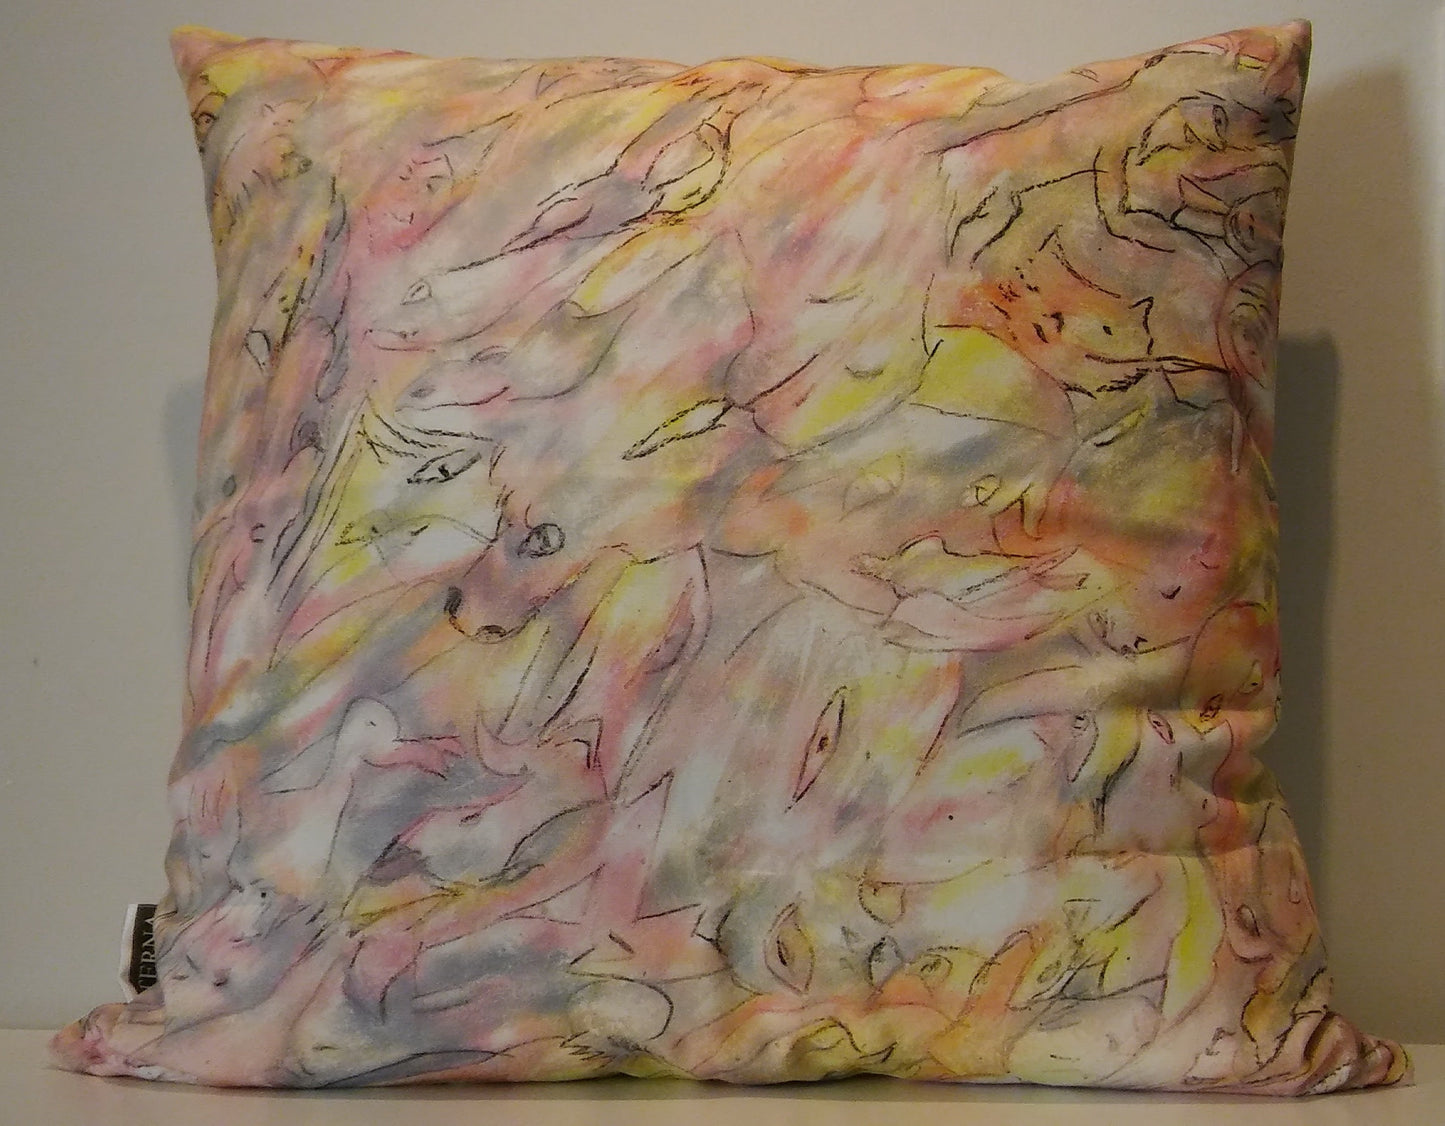 Spirits of the night - Cushion Cover